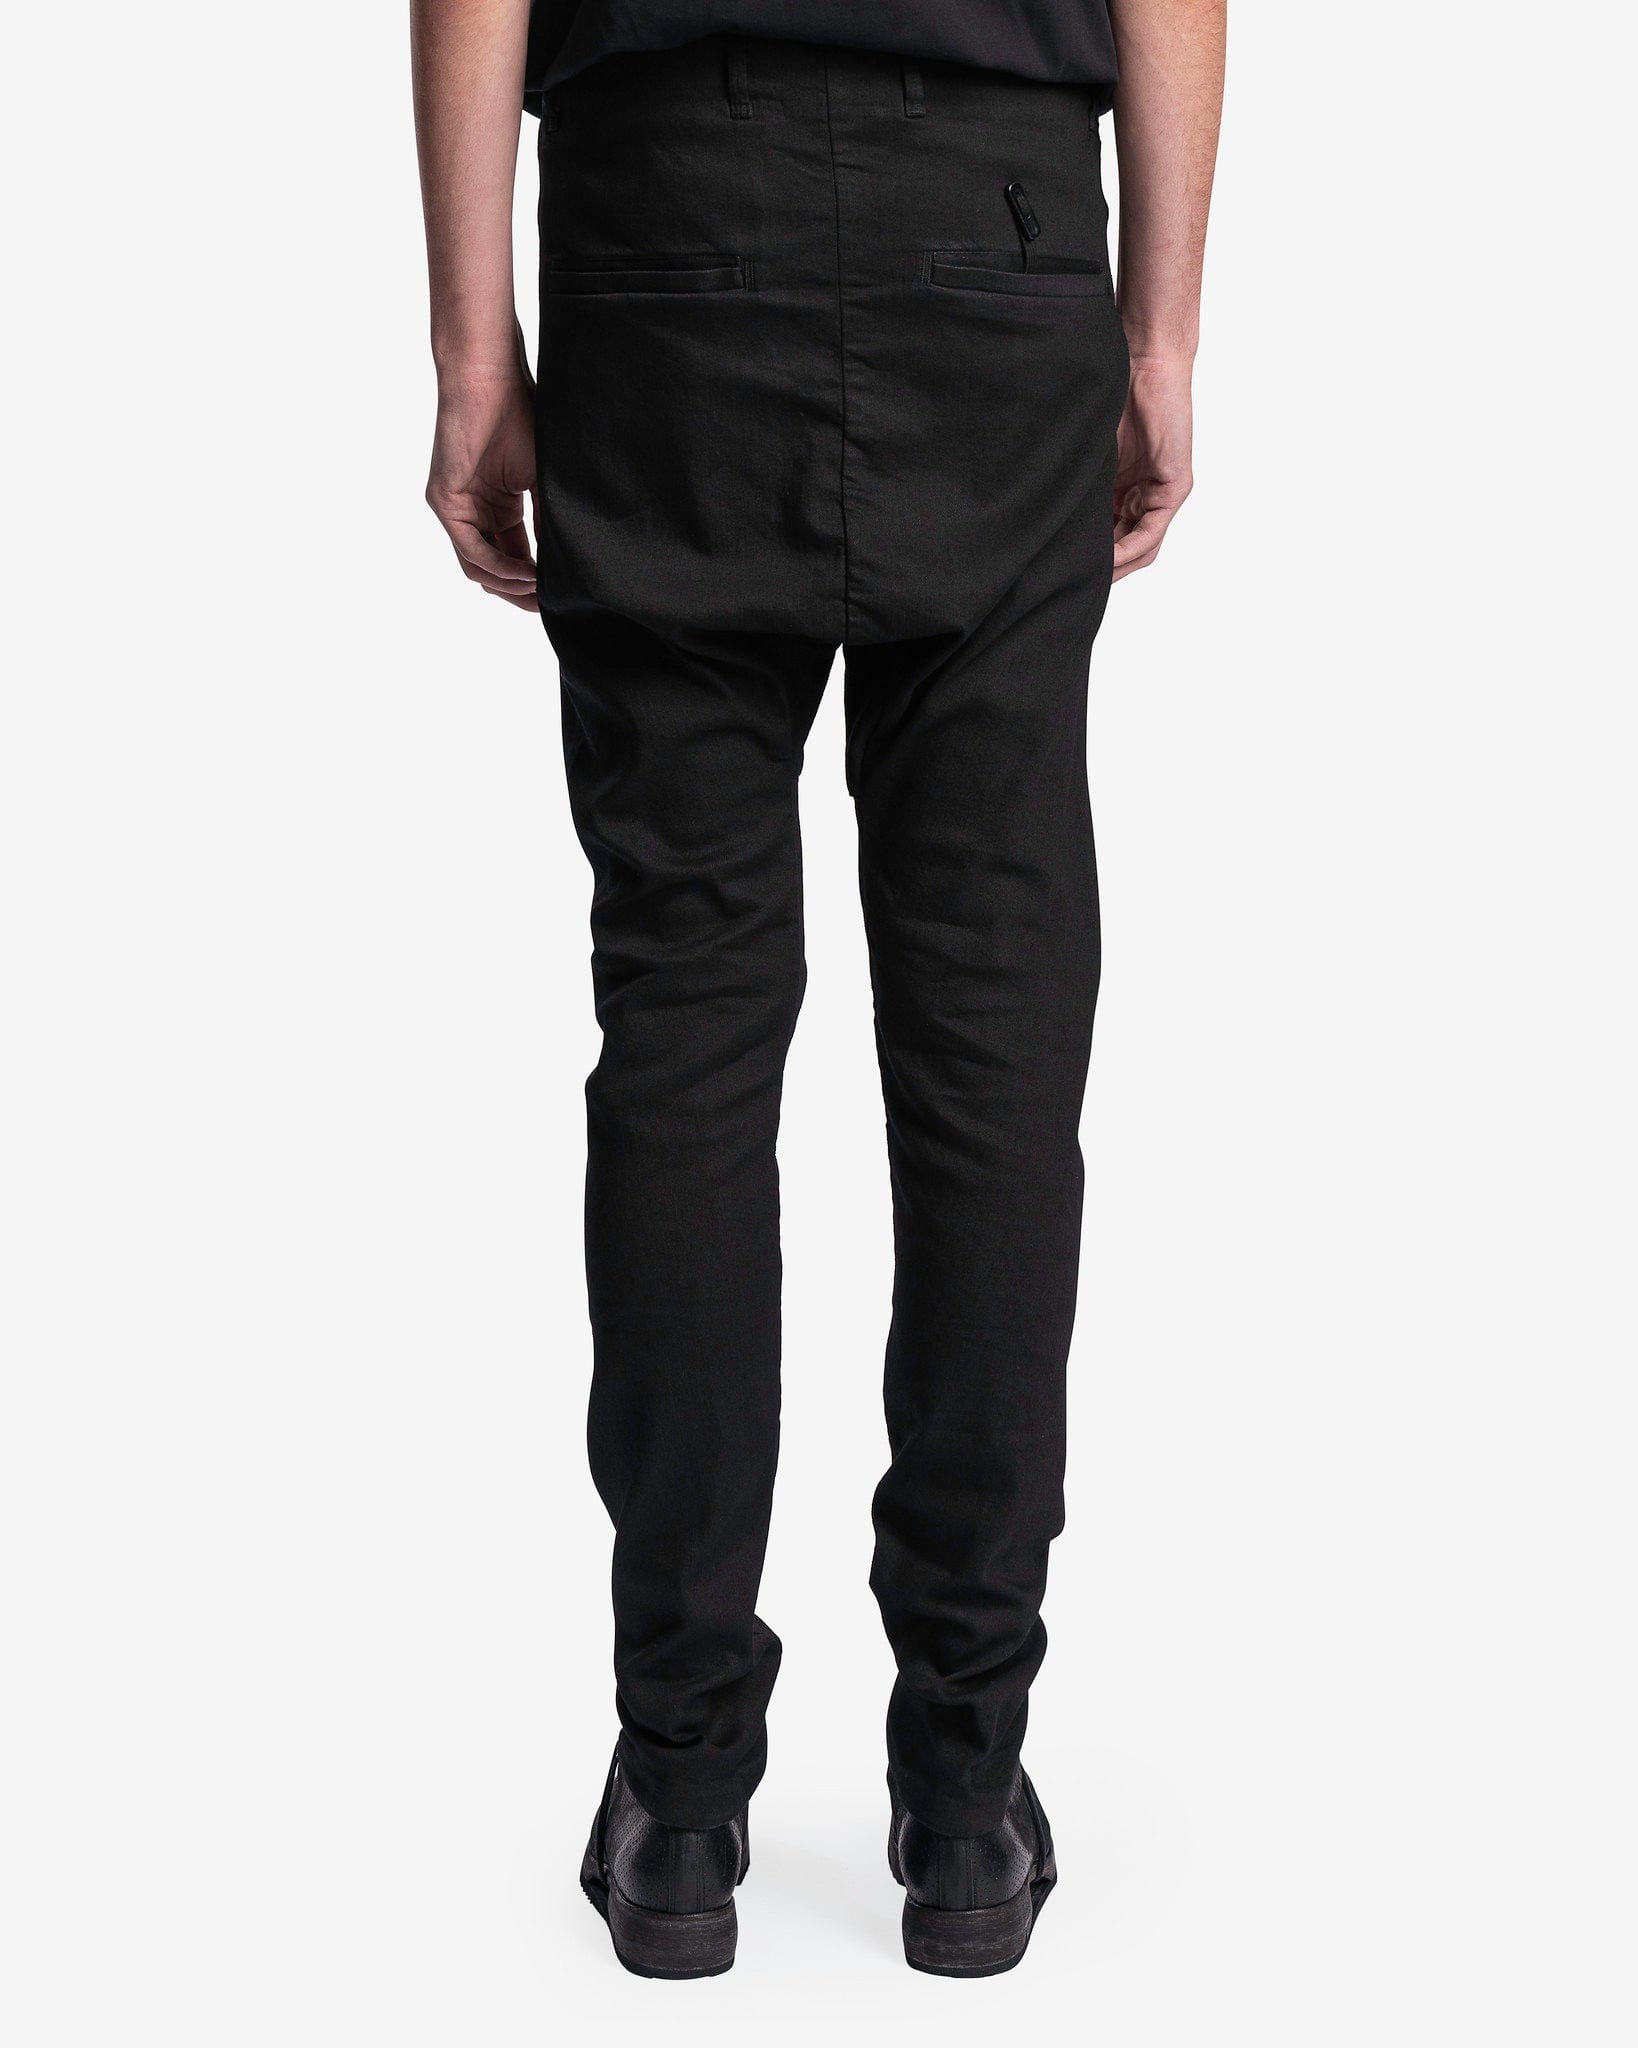 P11 Resin Dyed Pants in Black – SVRN